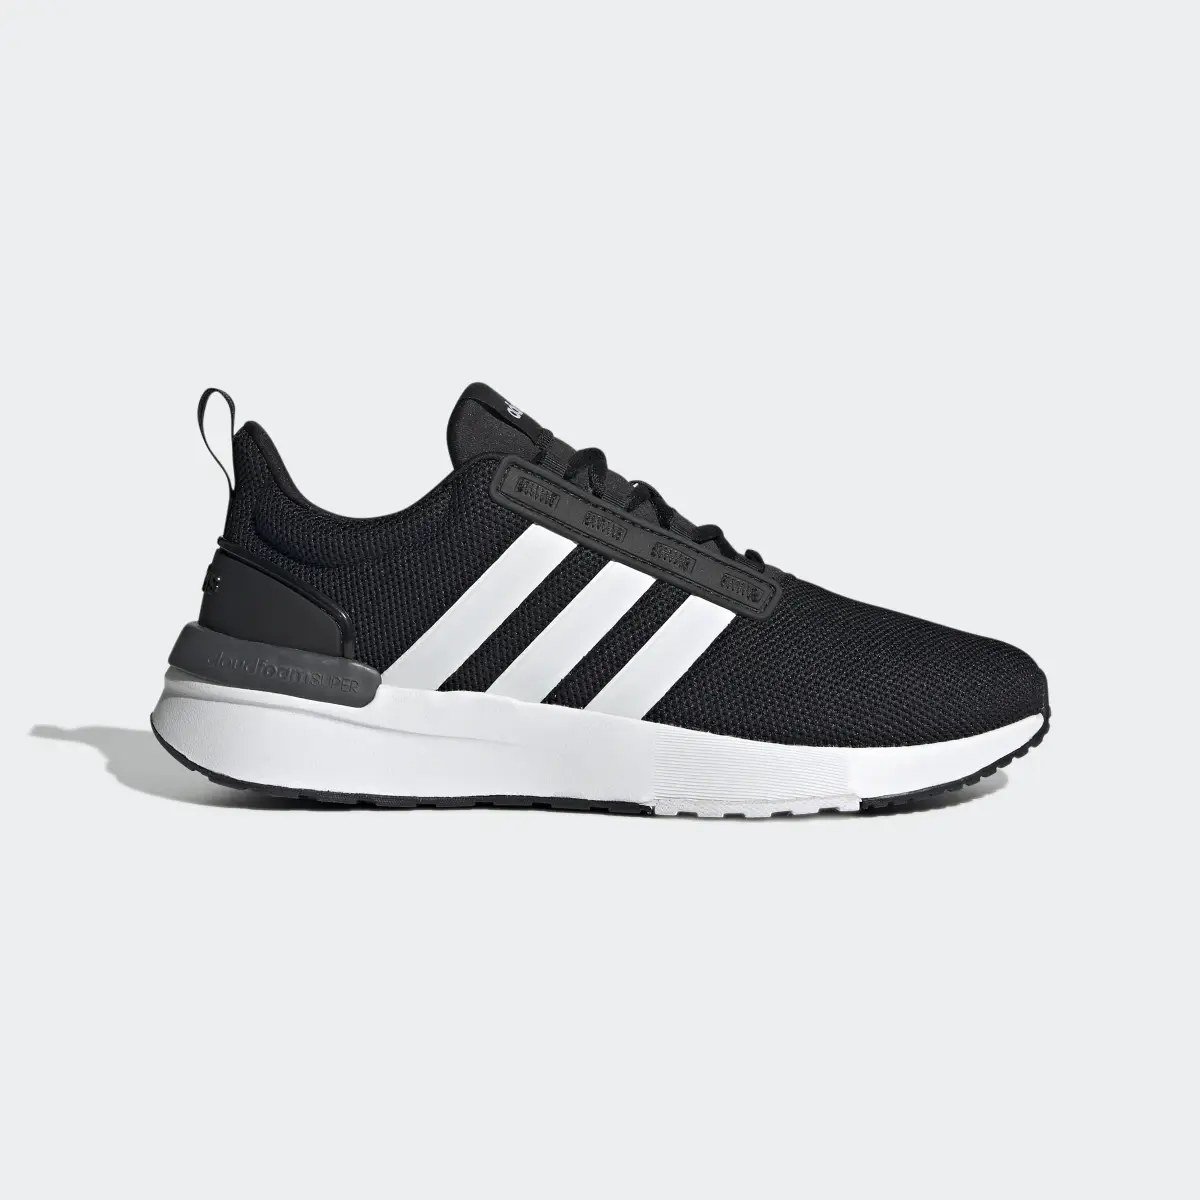 Adidas Racer TR21 Wide Shoes. 2